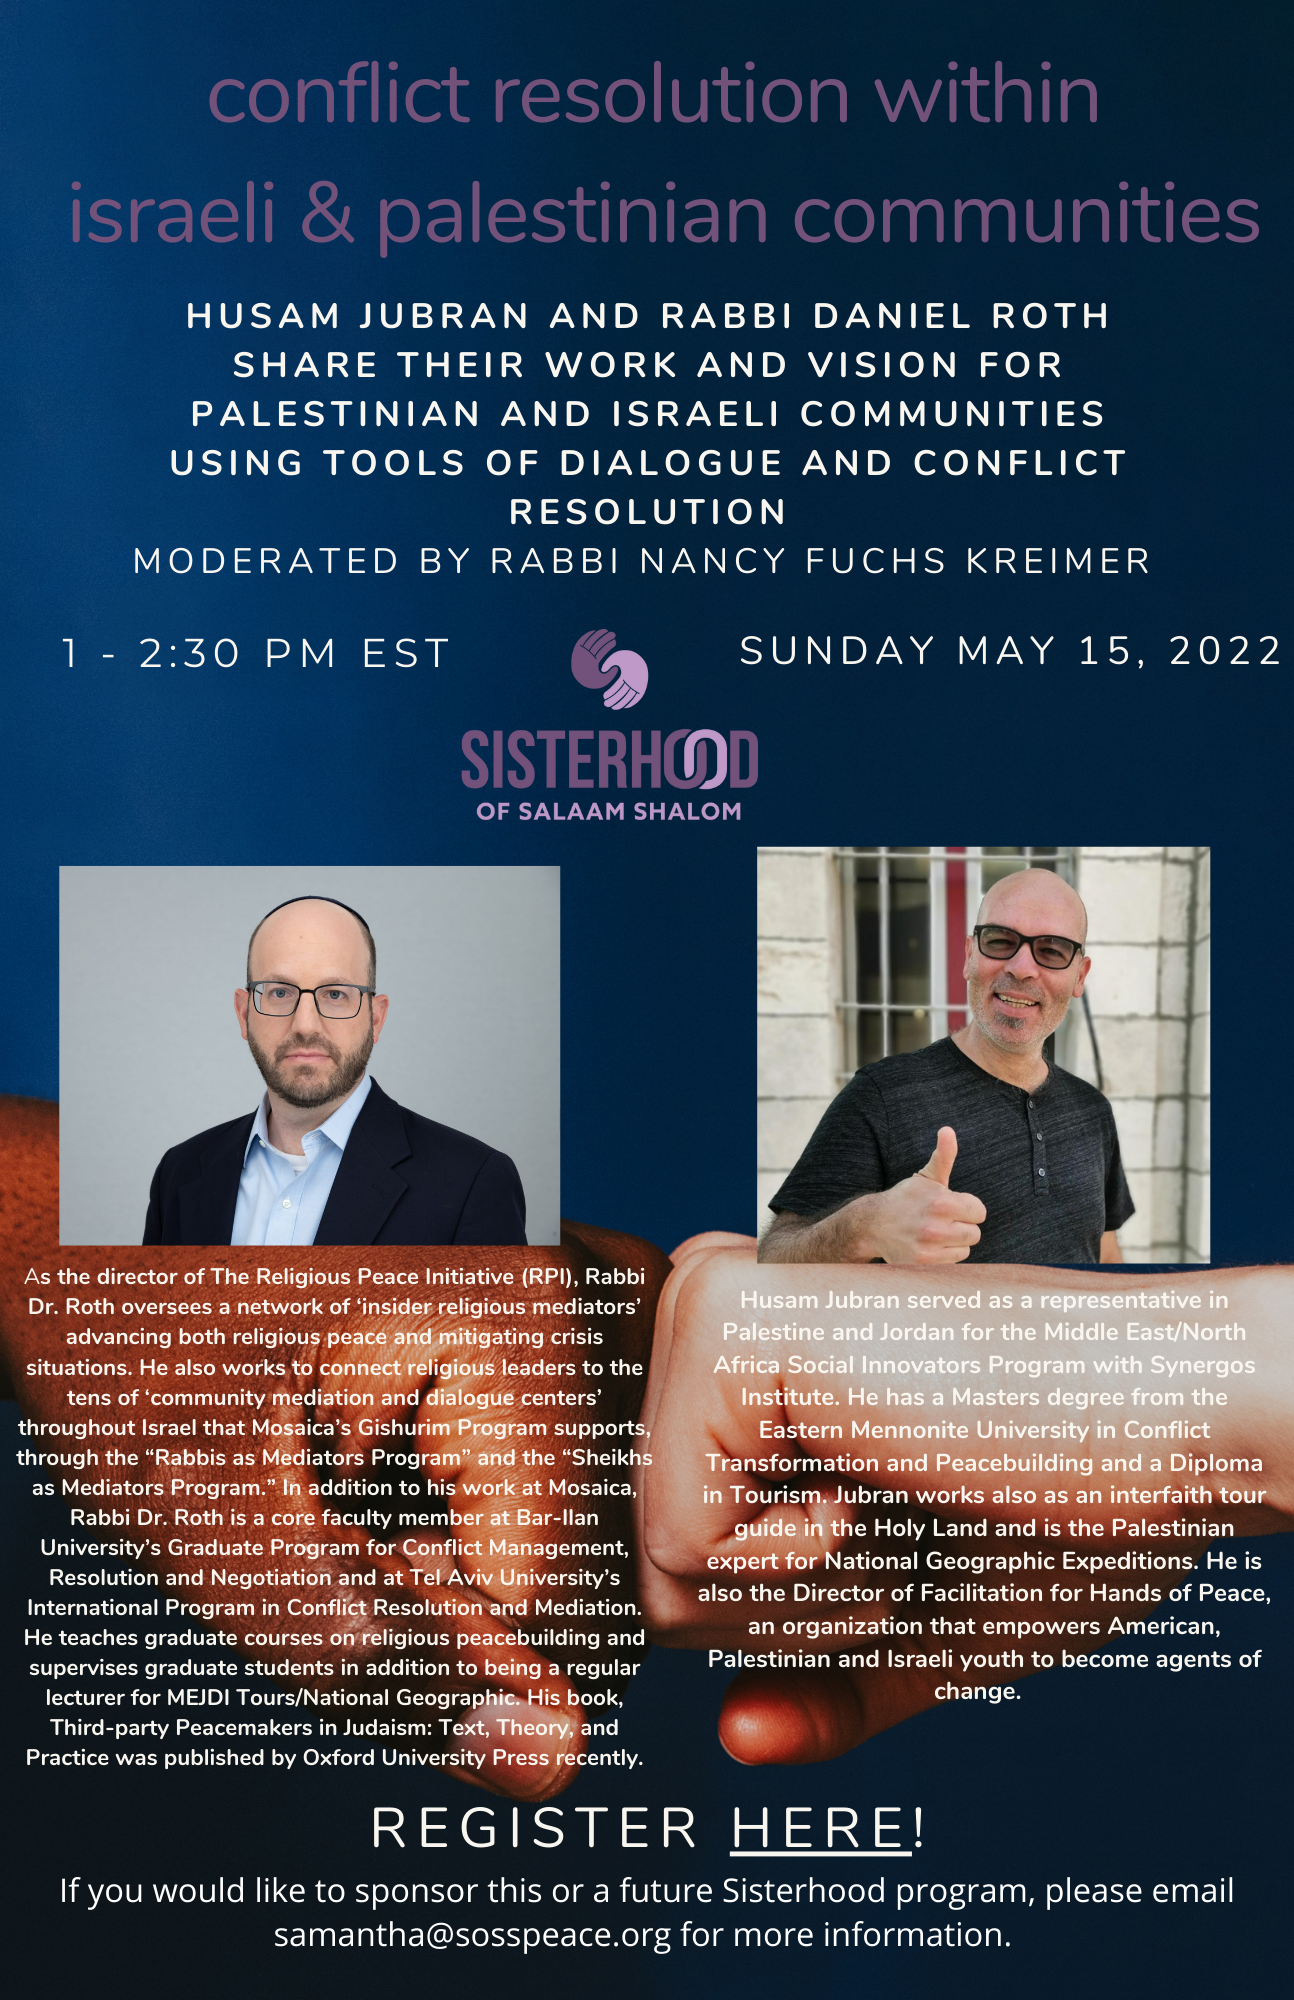 Conflict resolution in Israeli and Palestinian Communities May 15 1-2:30 p.m. ET photo of a man in glasses, suit jacket and blue shirt, and a photo of a man in a black t-shirt and sunglasses giving a thumbs up, backdrop of two hands fist bumping